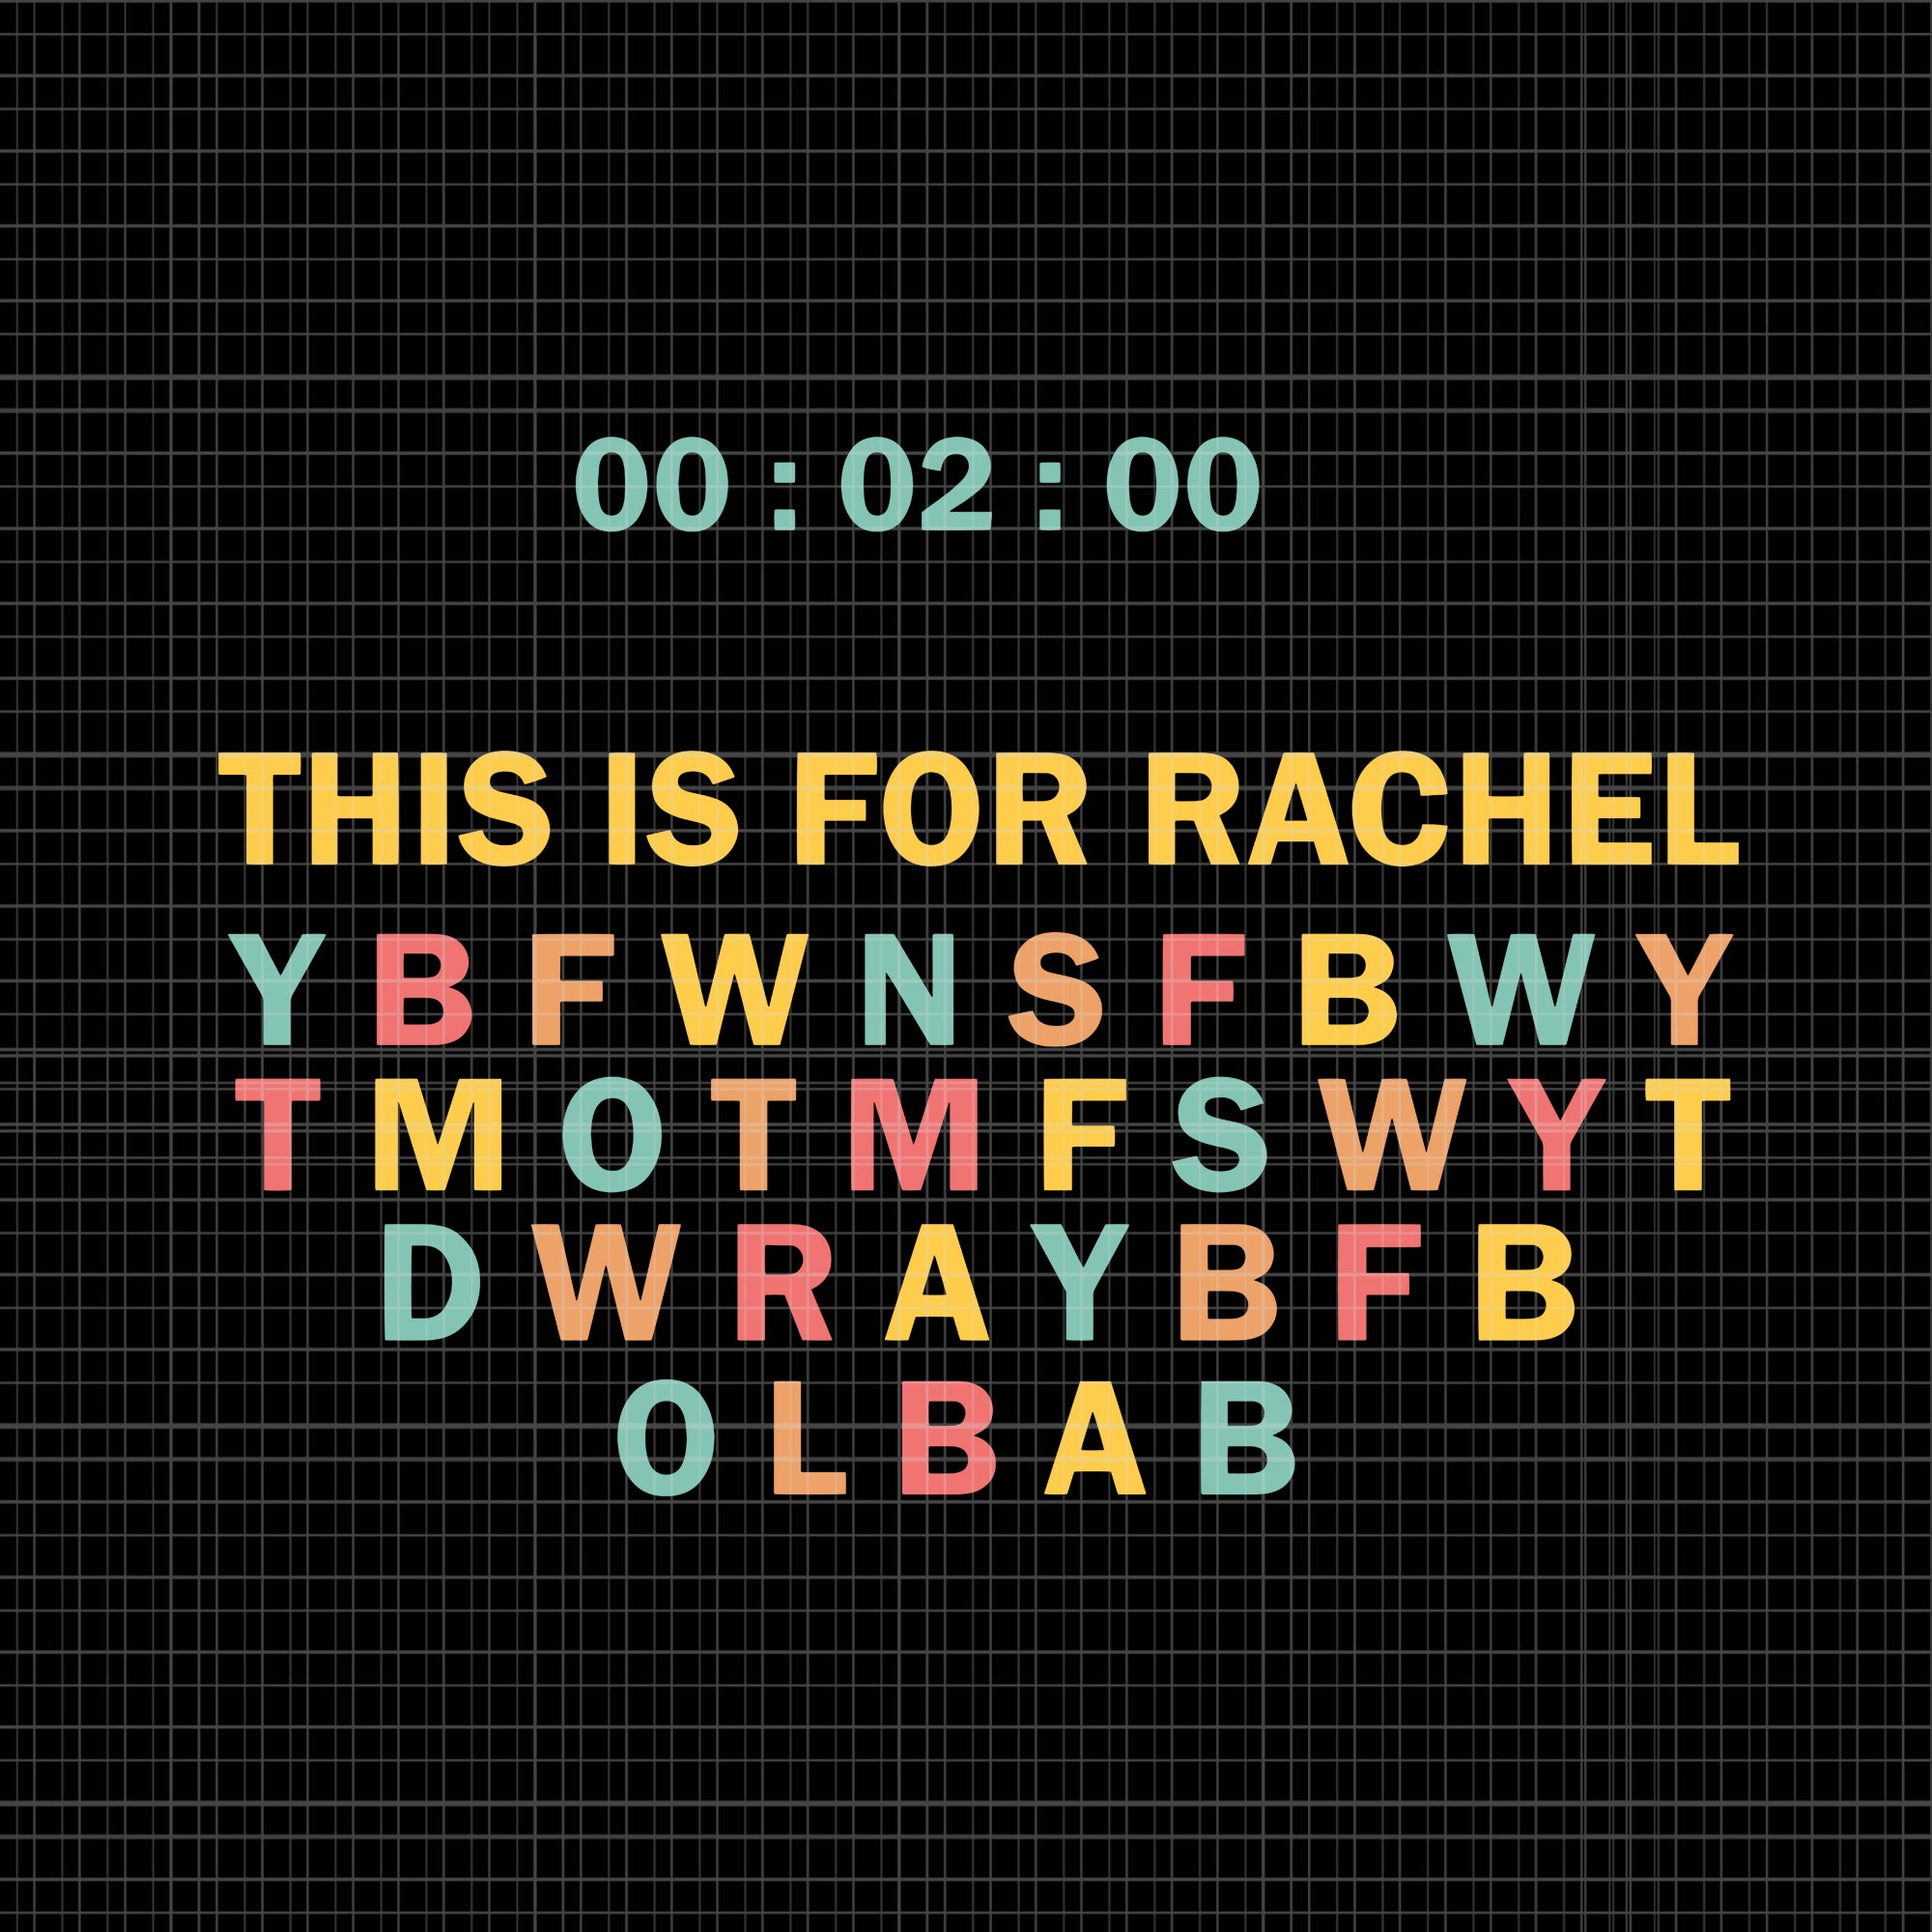 This is for rachel svg, this is for rachel png, this is for rachel, this is for rachel funny svg, this is for rachel funny png, this is for rachel funny